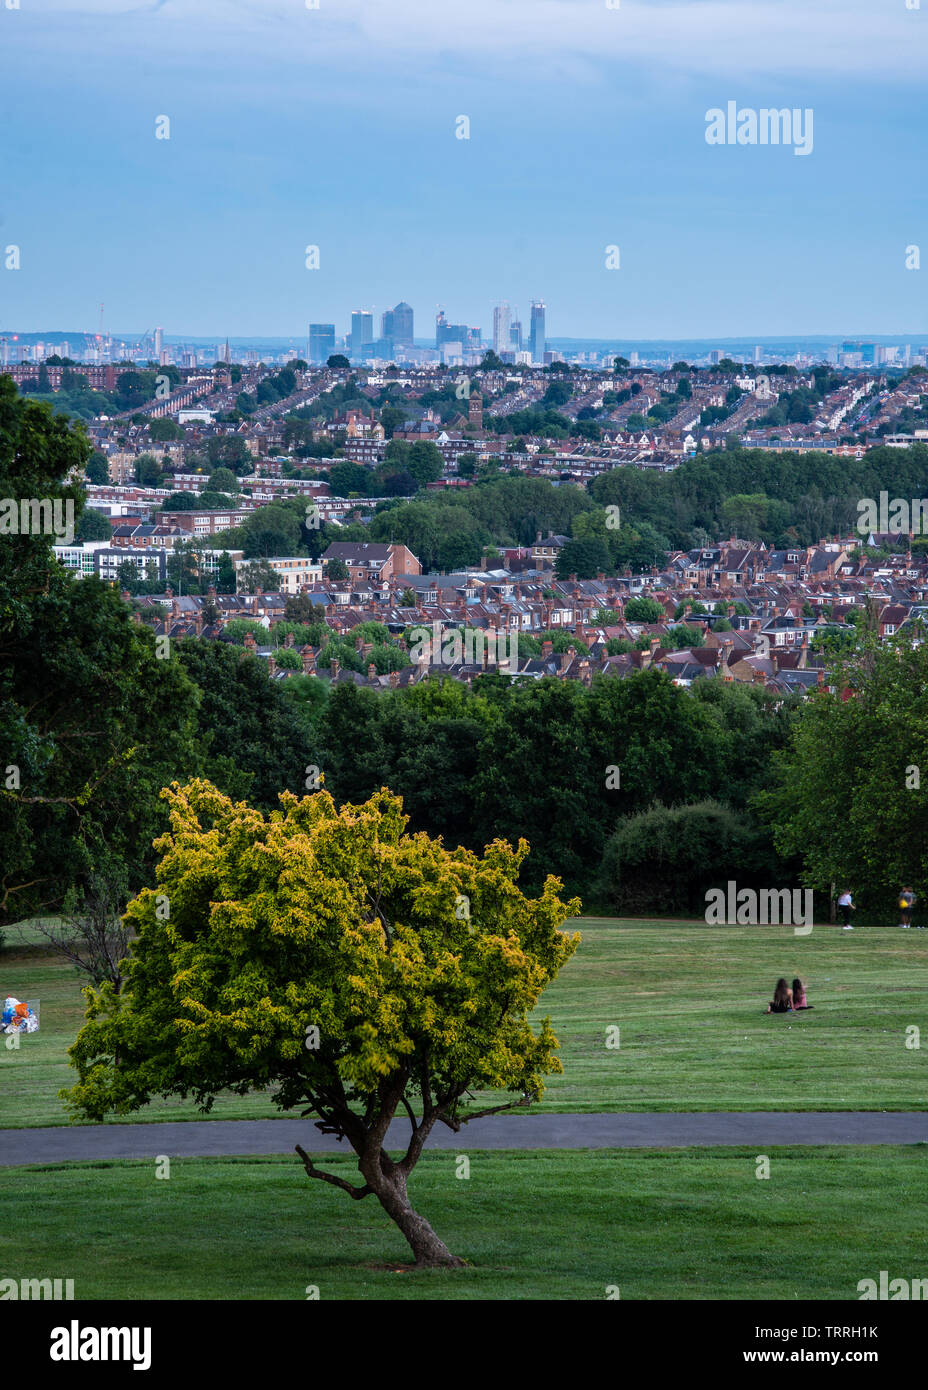 London, England, UK - June 1, 2019: People sit in Alexandra Palace Park as dusk falls over the suburbs and skyline of London. Stock Photo